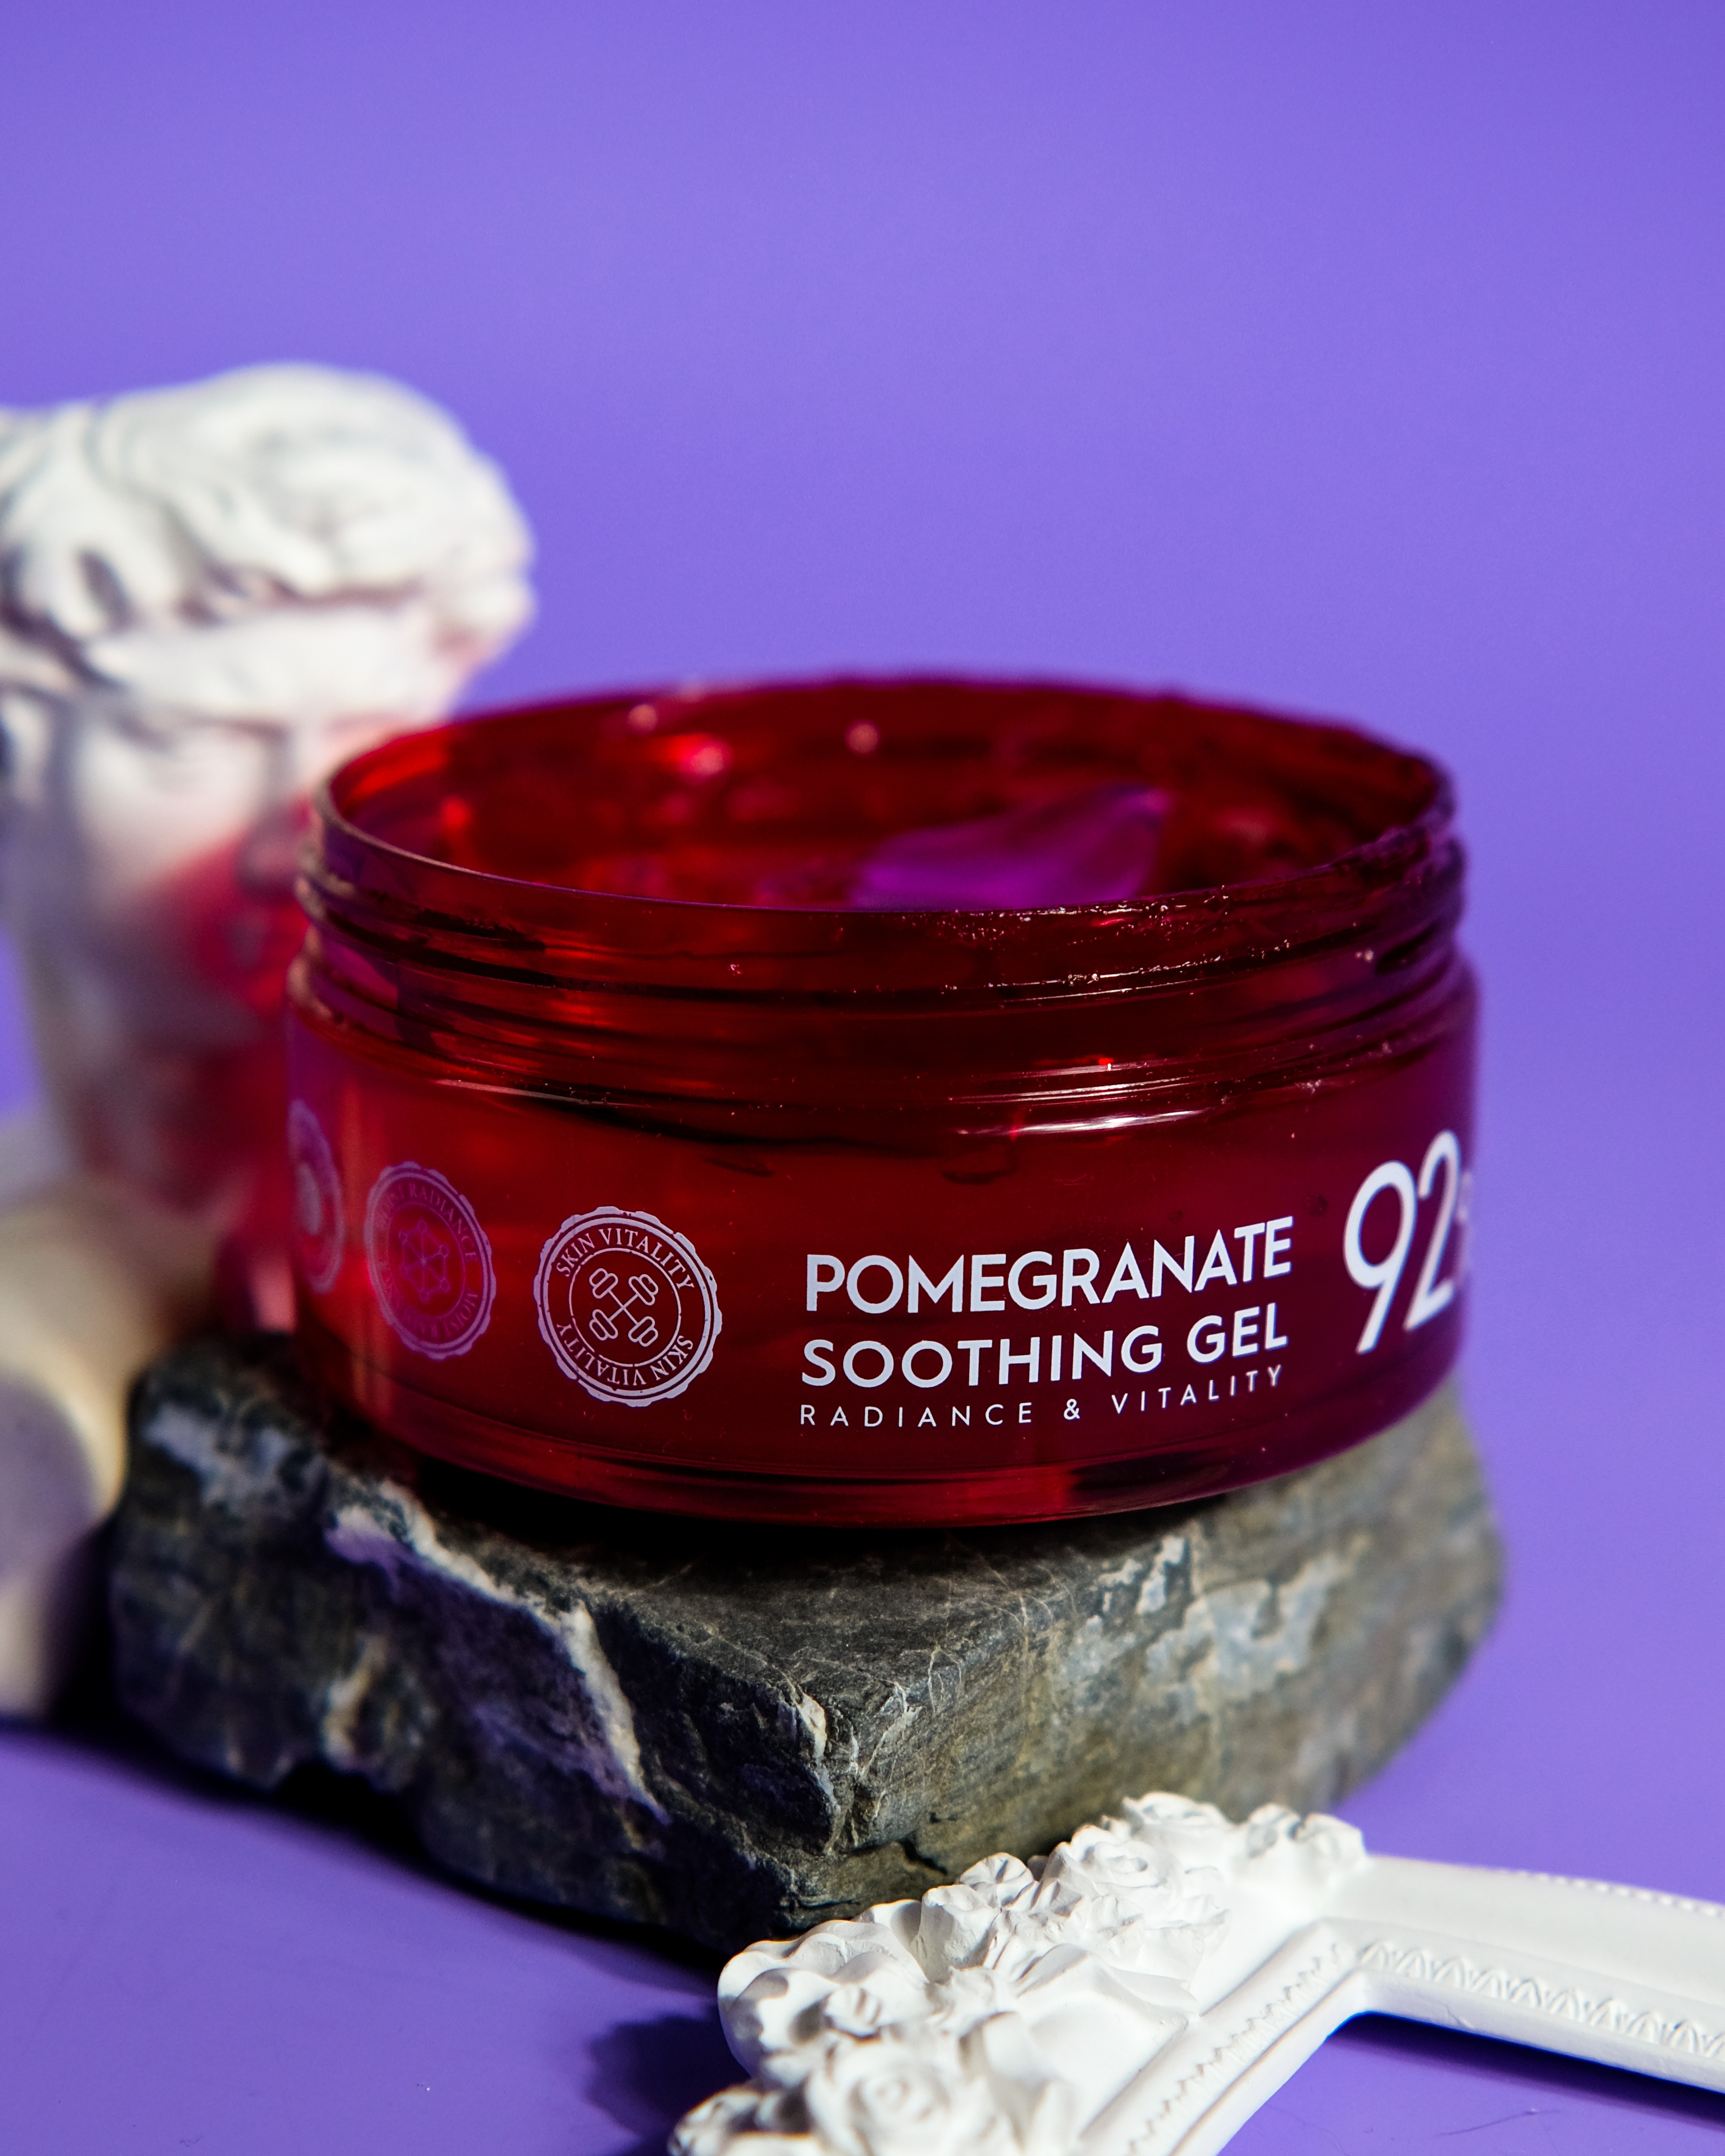 SNP Intensive Pomegranate Soothing Gel